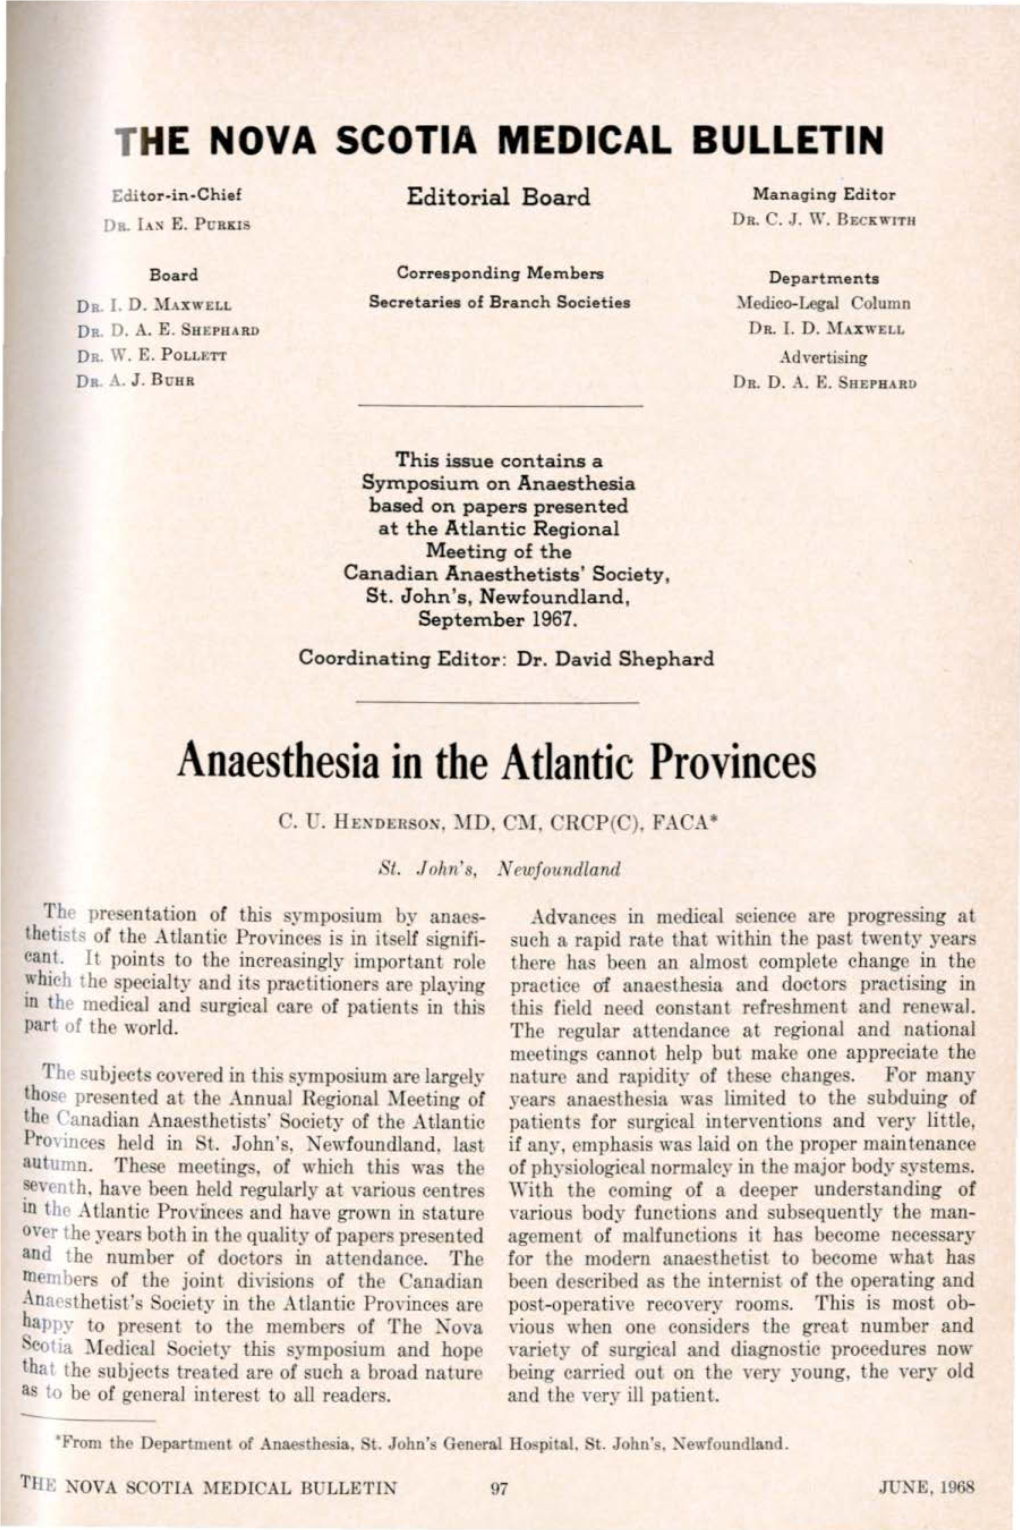 Anaesthesia in the Atlantic Provinces